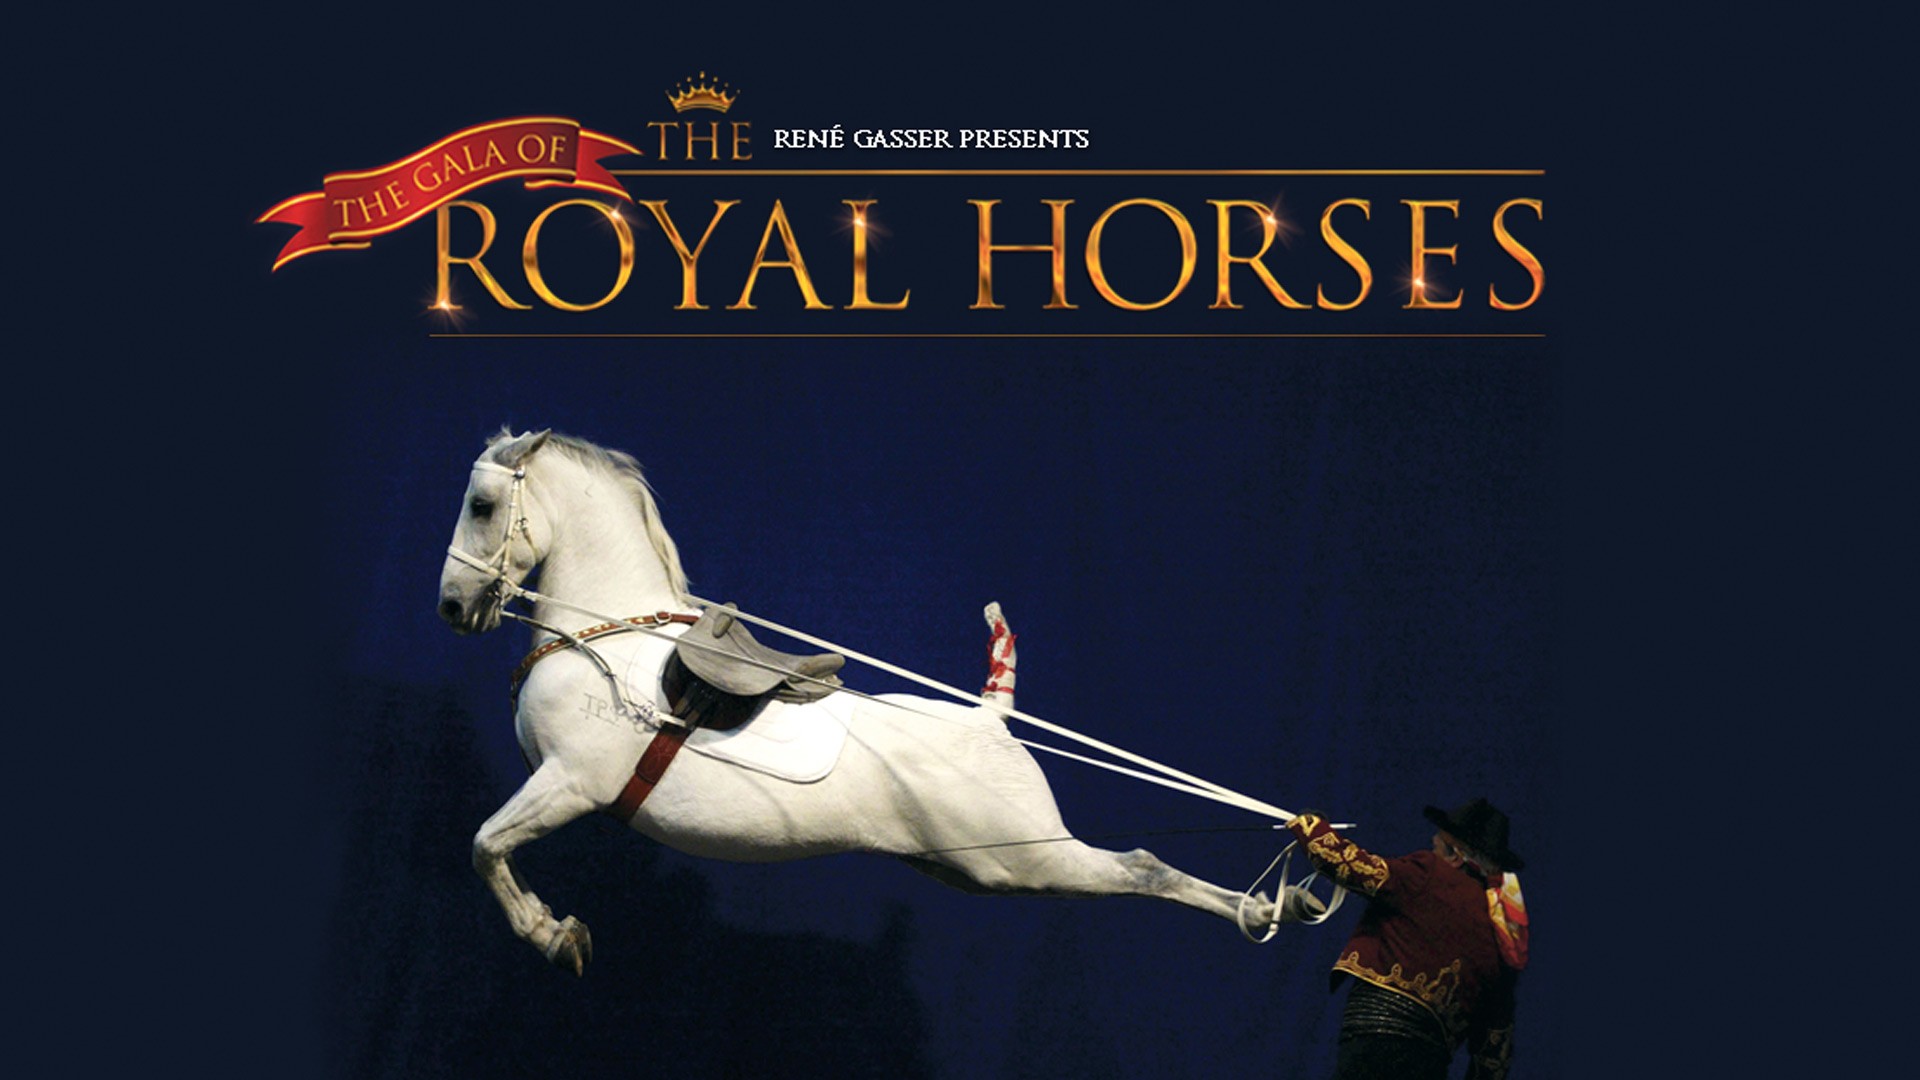 About The Gala of the Royal Horses